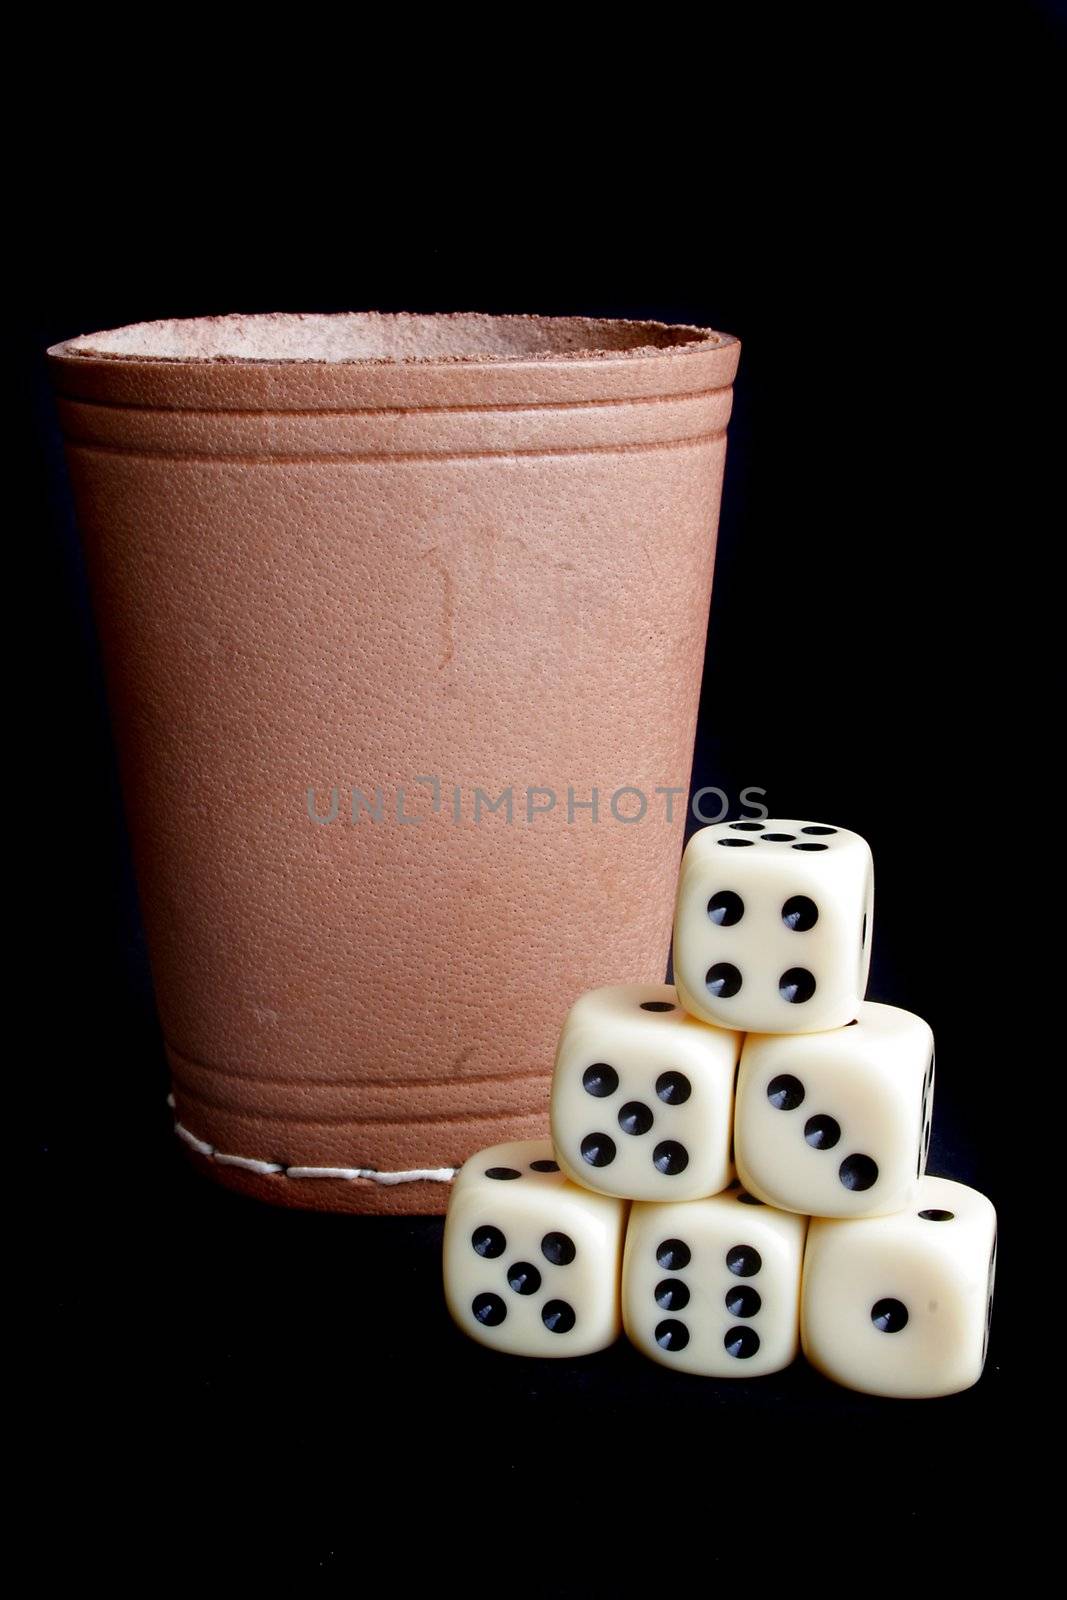 A dice shaker and several dices. All on a plain black background.